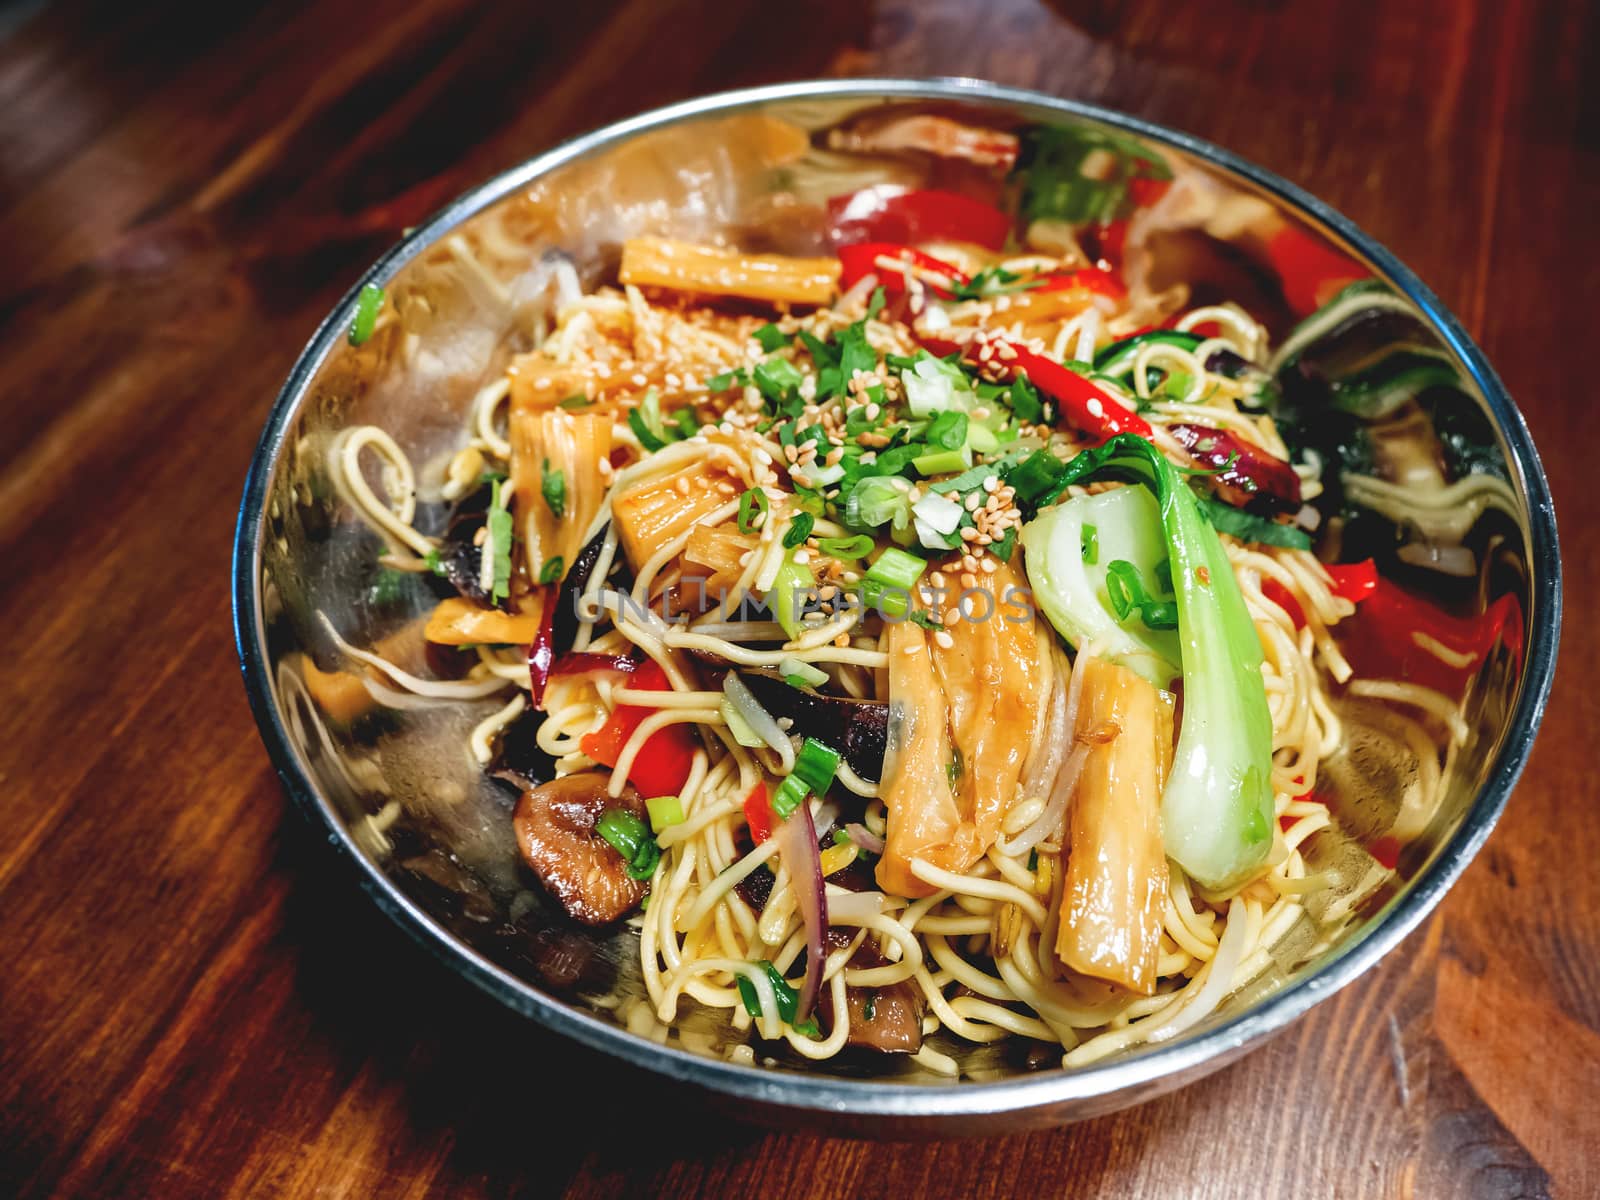 Asian cuisine - noodle with stir fried vegetables. Bowl with food on wooden table.